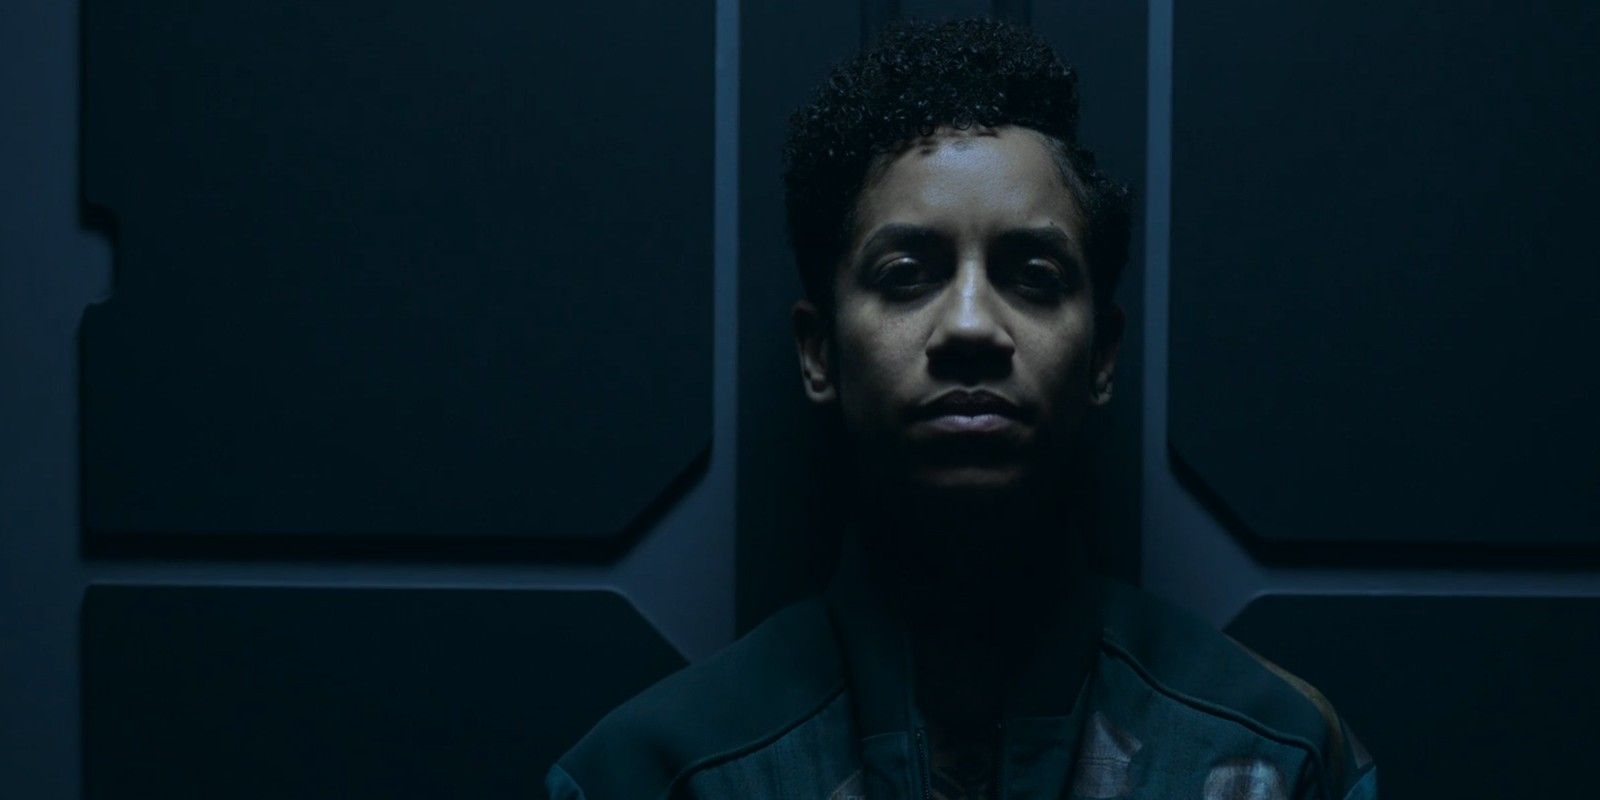 The Expanse: Dominique Tipper on Naomi's Time in Hard Vacuum